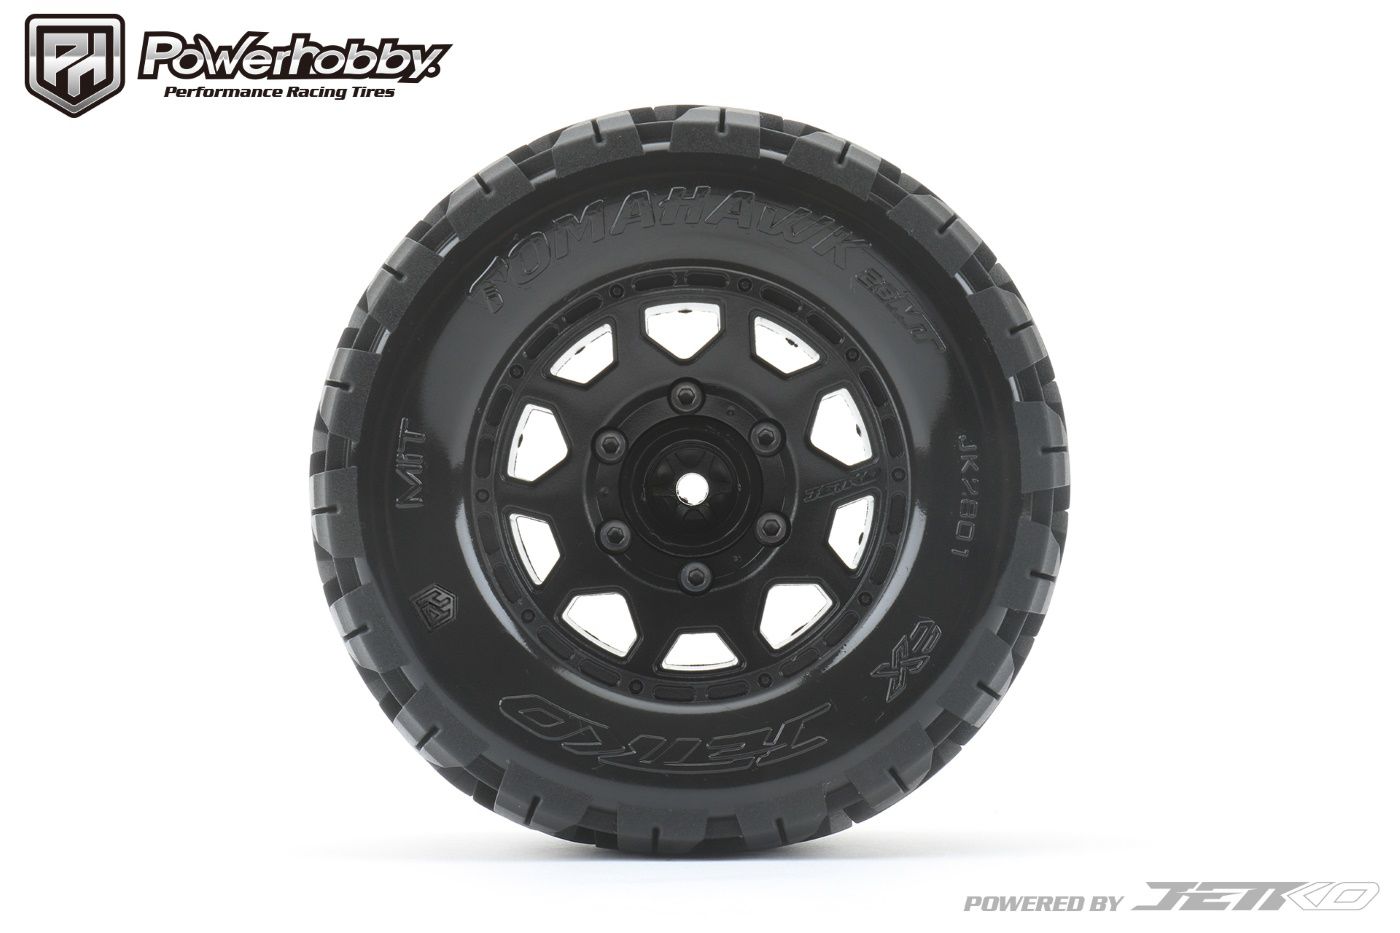 Powerhobby 1/10 2.8 MT Tomahawk Belted Tires (2) with Removable Hex Wheels - PowerHobby